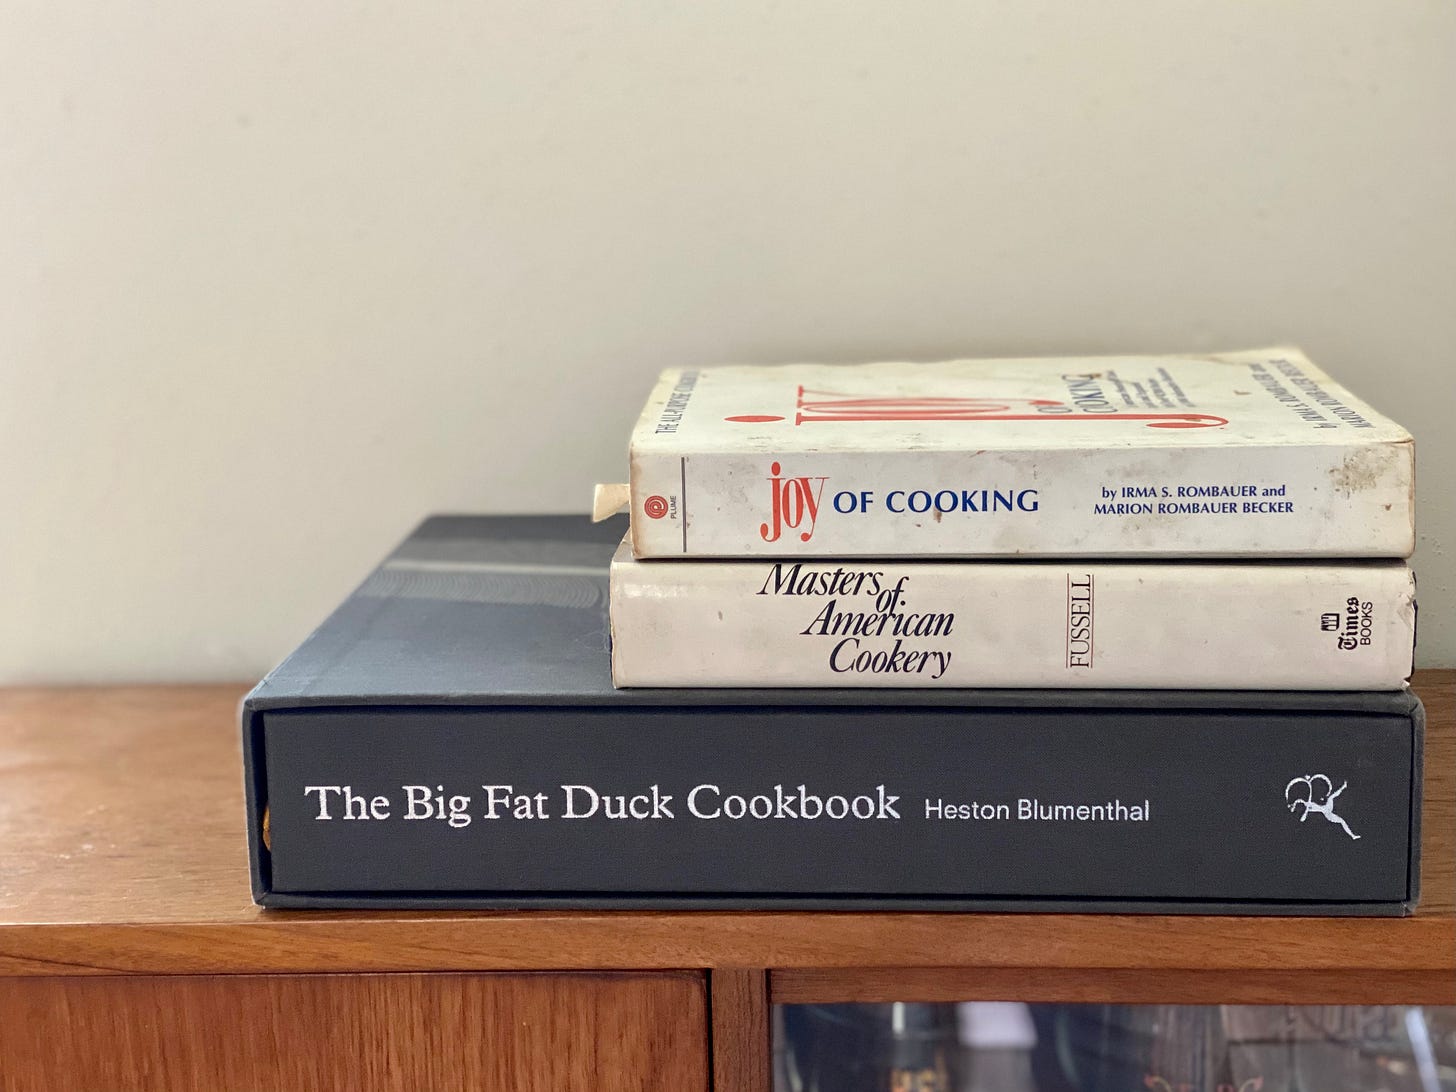 A stack of three books on a wooden shelf: The Joy of Cooking, Masters of American Cookery by Betty Fussell, and The Big Fat Duck Cookbook by Heston Blumenthal